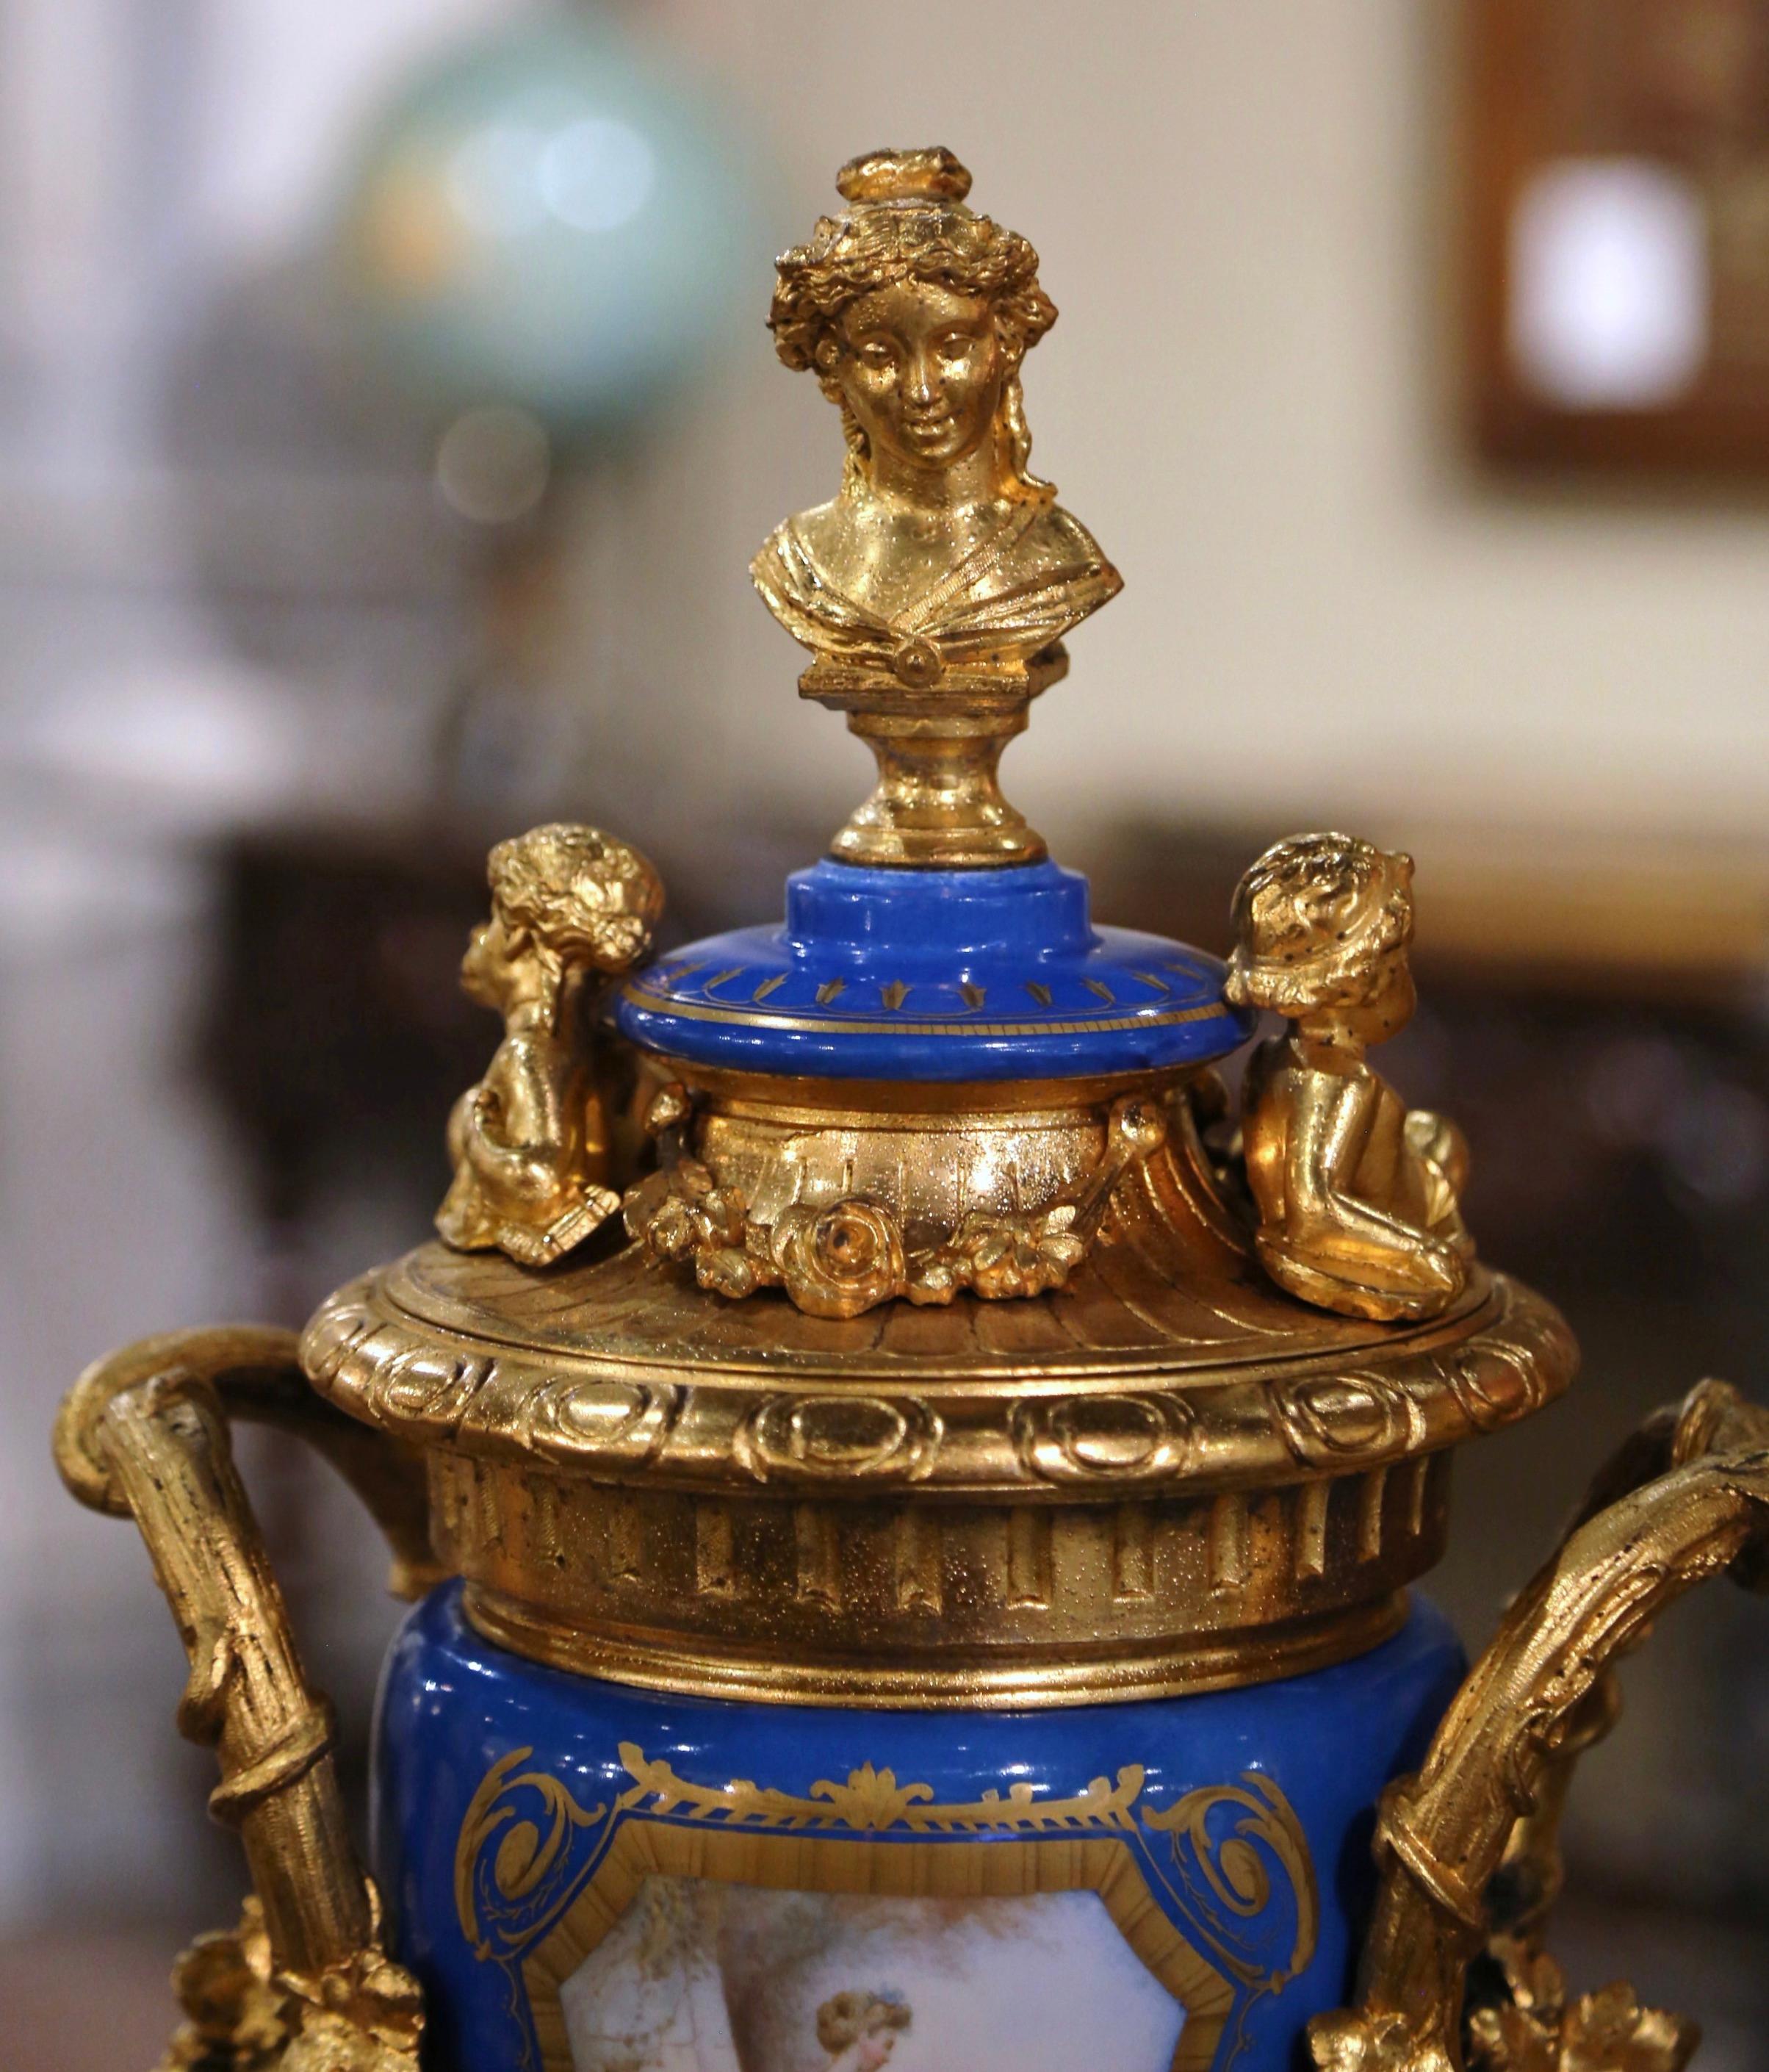 Pair of 19th Century French Blue Porcelain and Gilt Bronze Sèvres Urns Vases For Sale 5